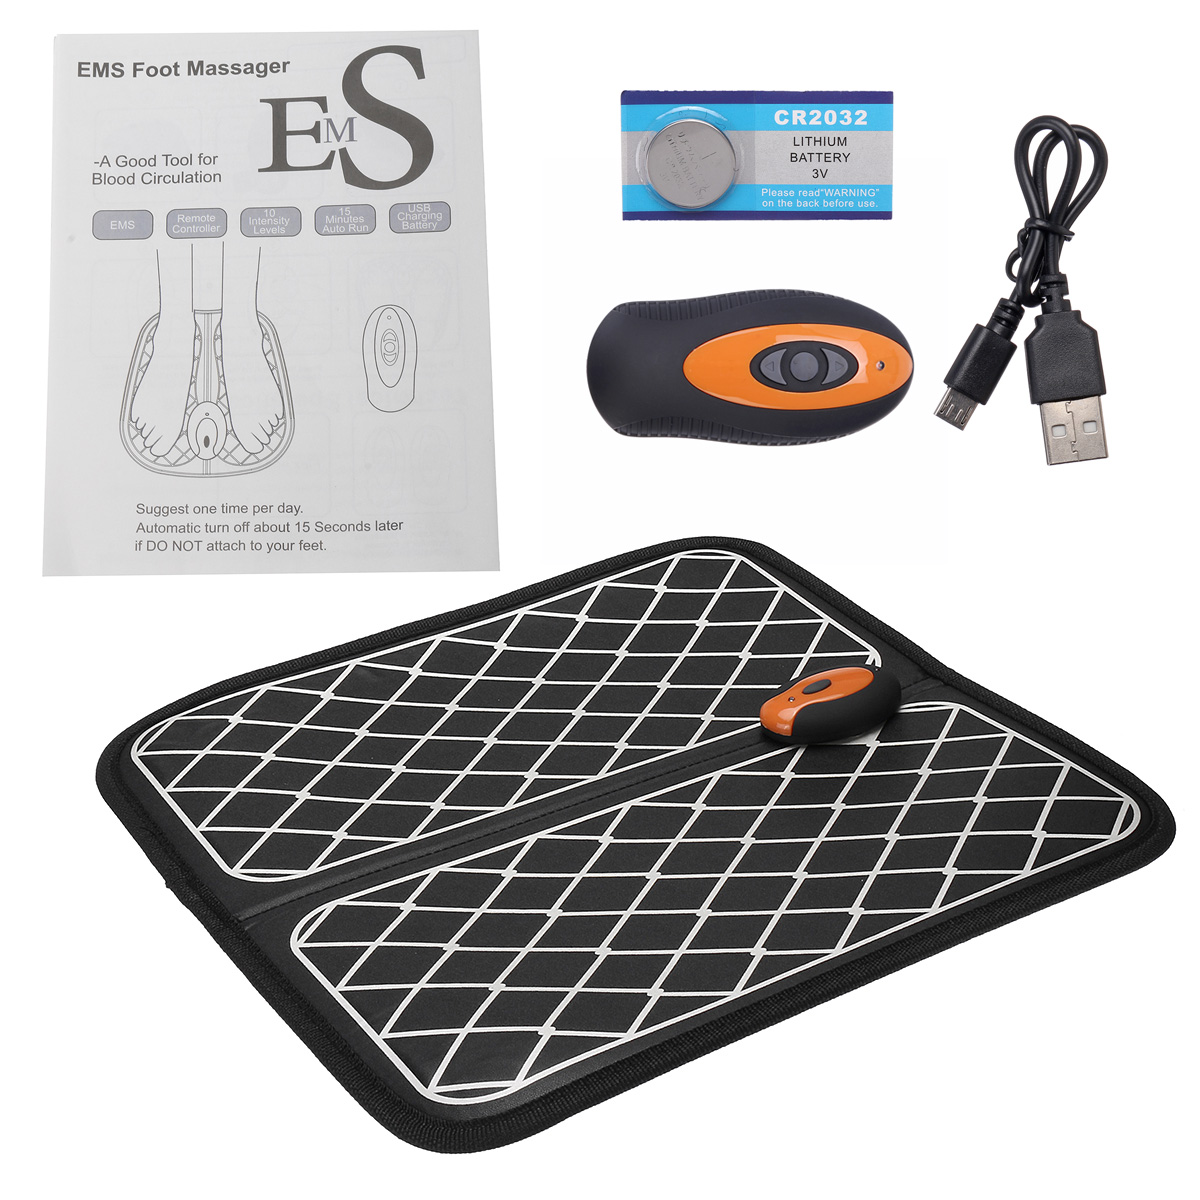 EMS-Portable-Shiatsu-Foot-Massager-Remote-controlled-Electric-Pad-Kneading-Circulation-Home-Electric-1508695-1